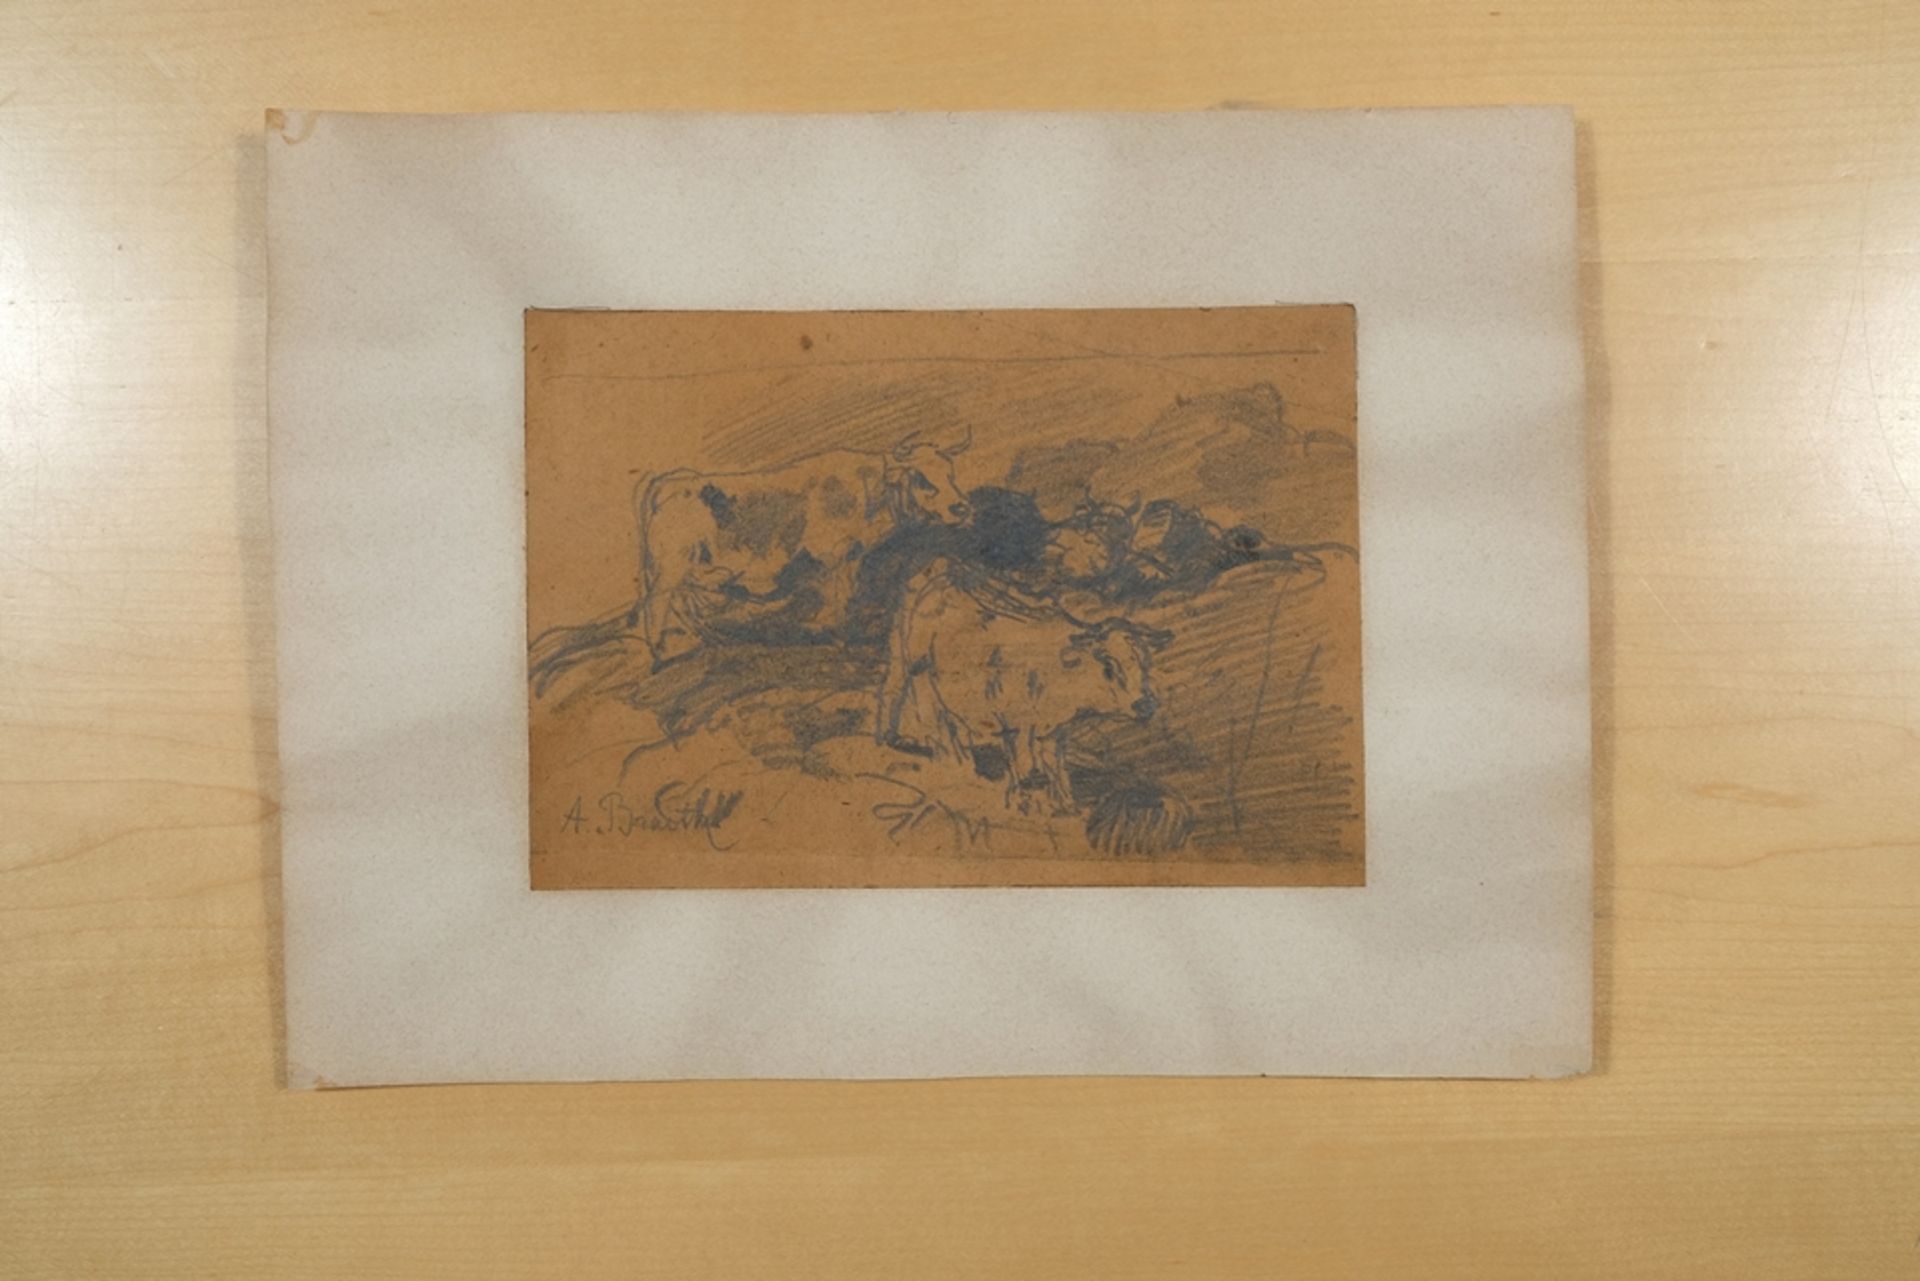 Braith, Anton (1836-1905) Cattle in Landscape, undated, pencil on paper.  - Image 4 of 4